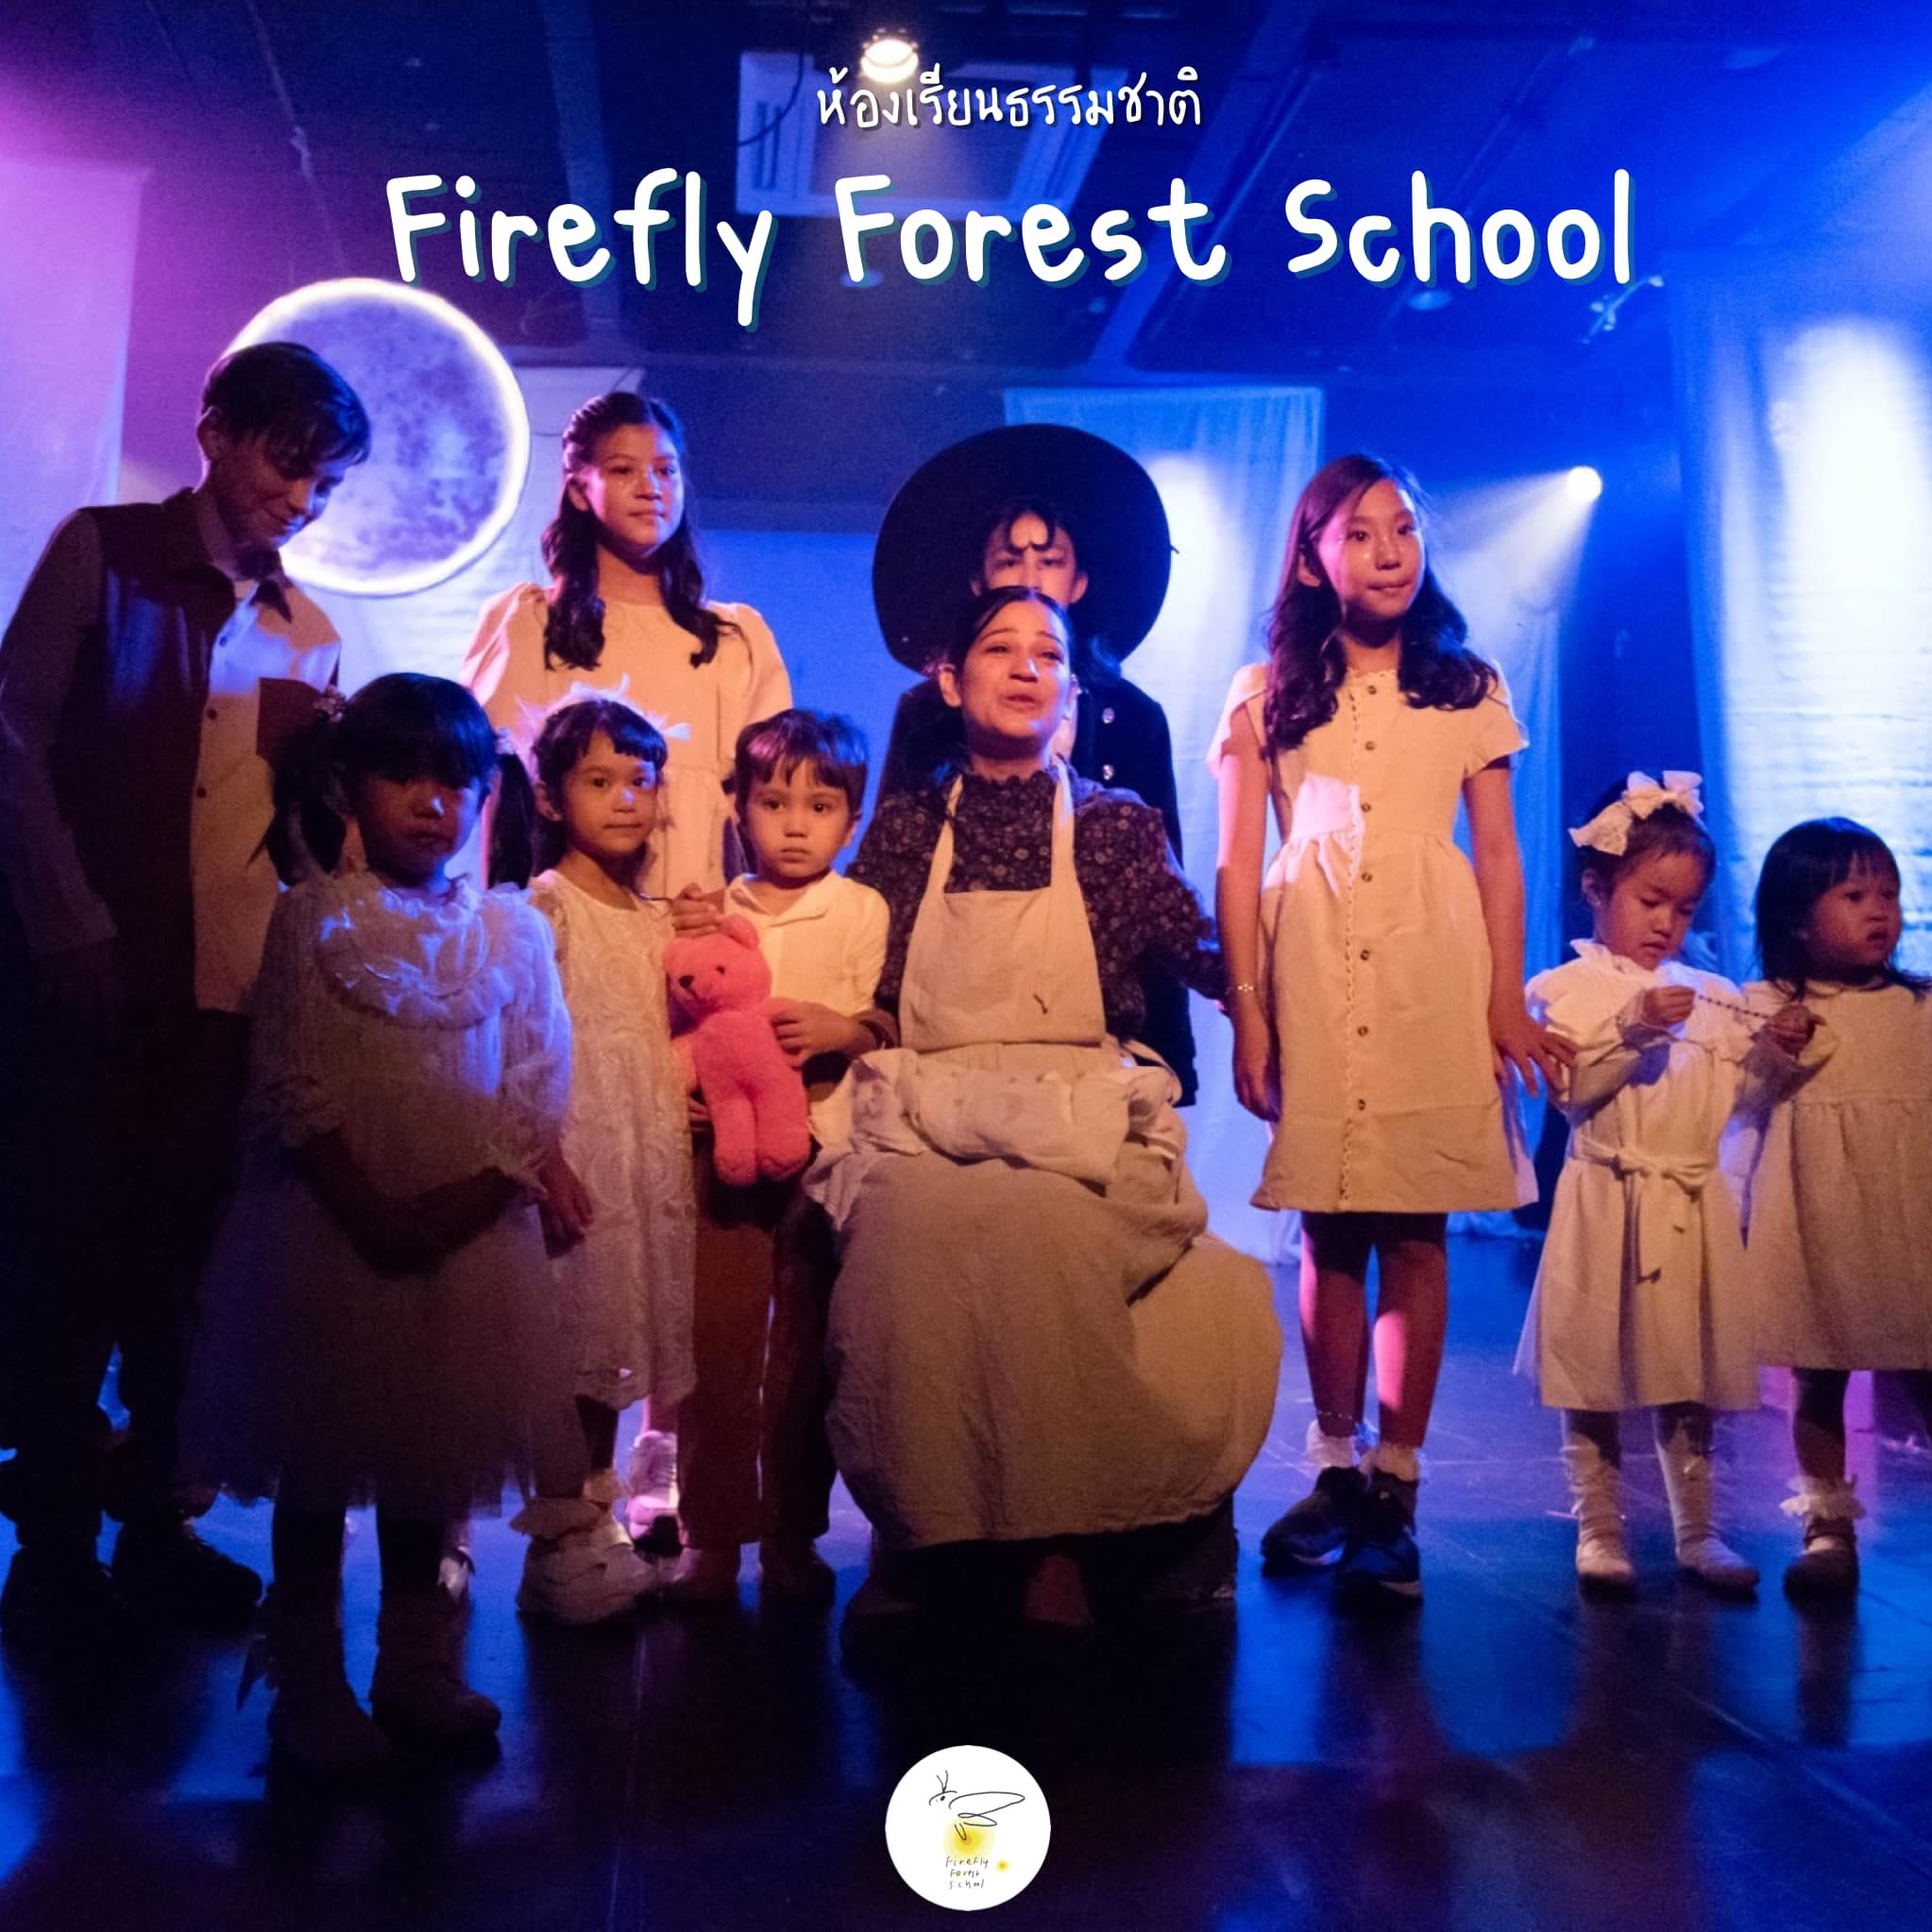 Theatre_Musical_Performance_FireFly_Forest_School_Bangkok_Thailand